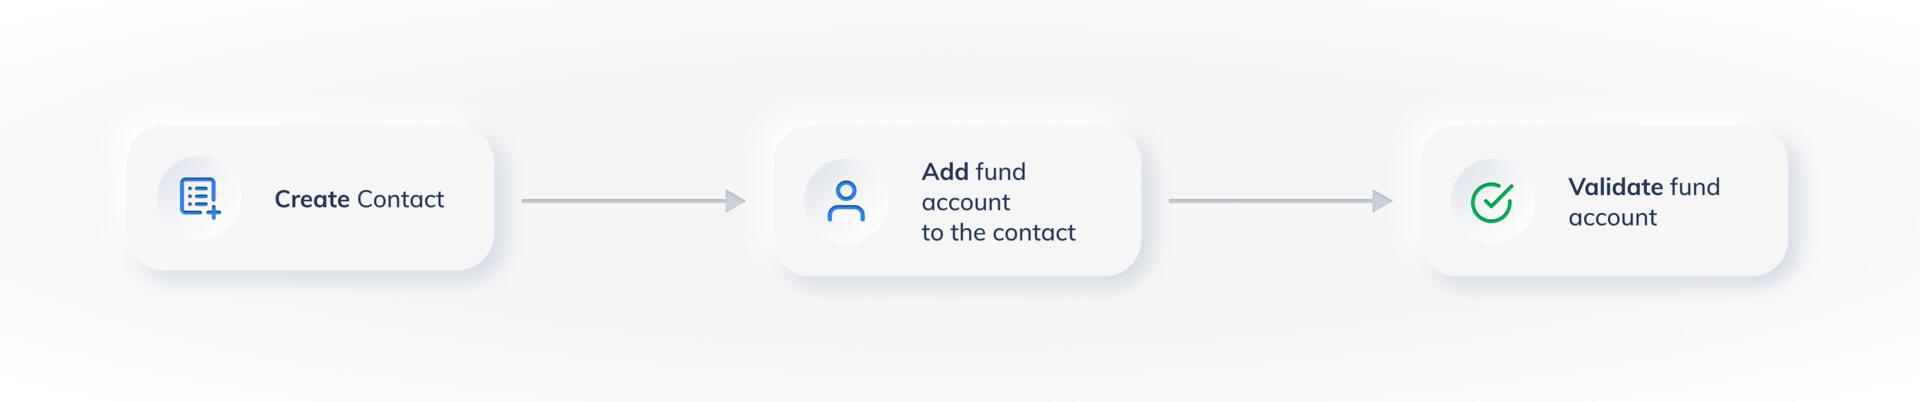 FAV workflow from creating a contact to adding funds and validating it.